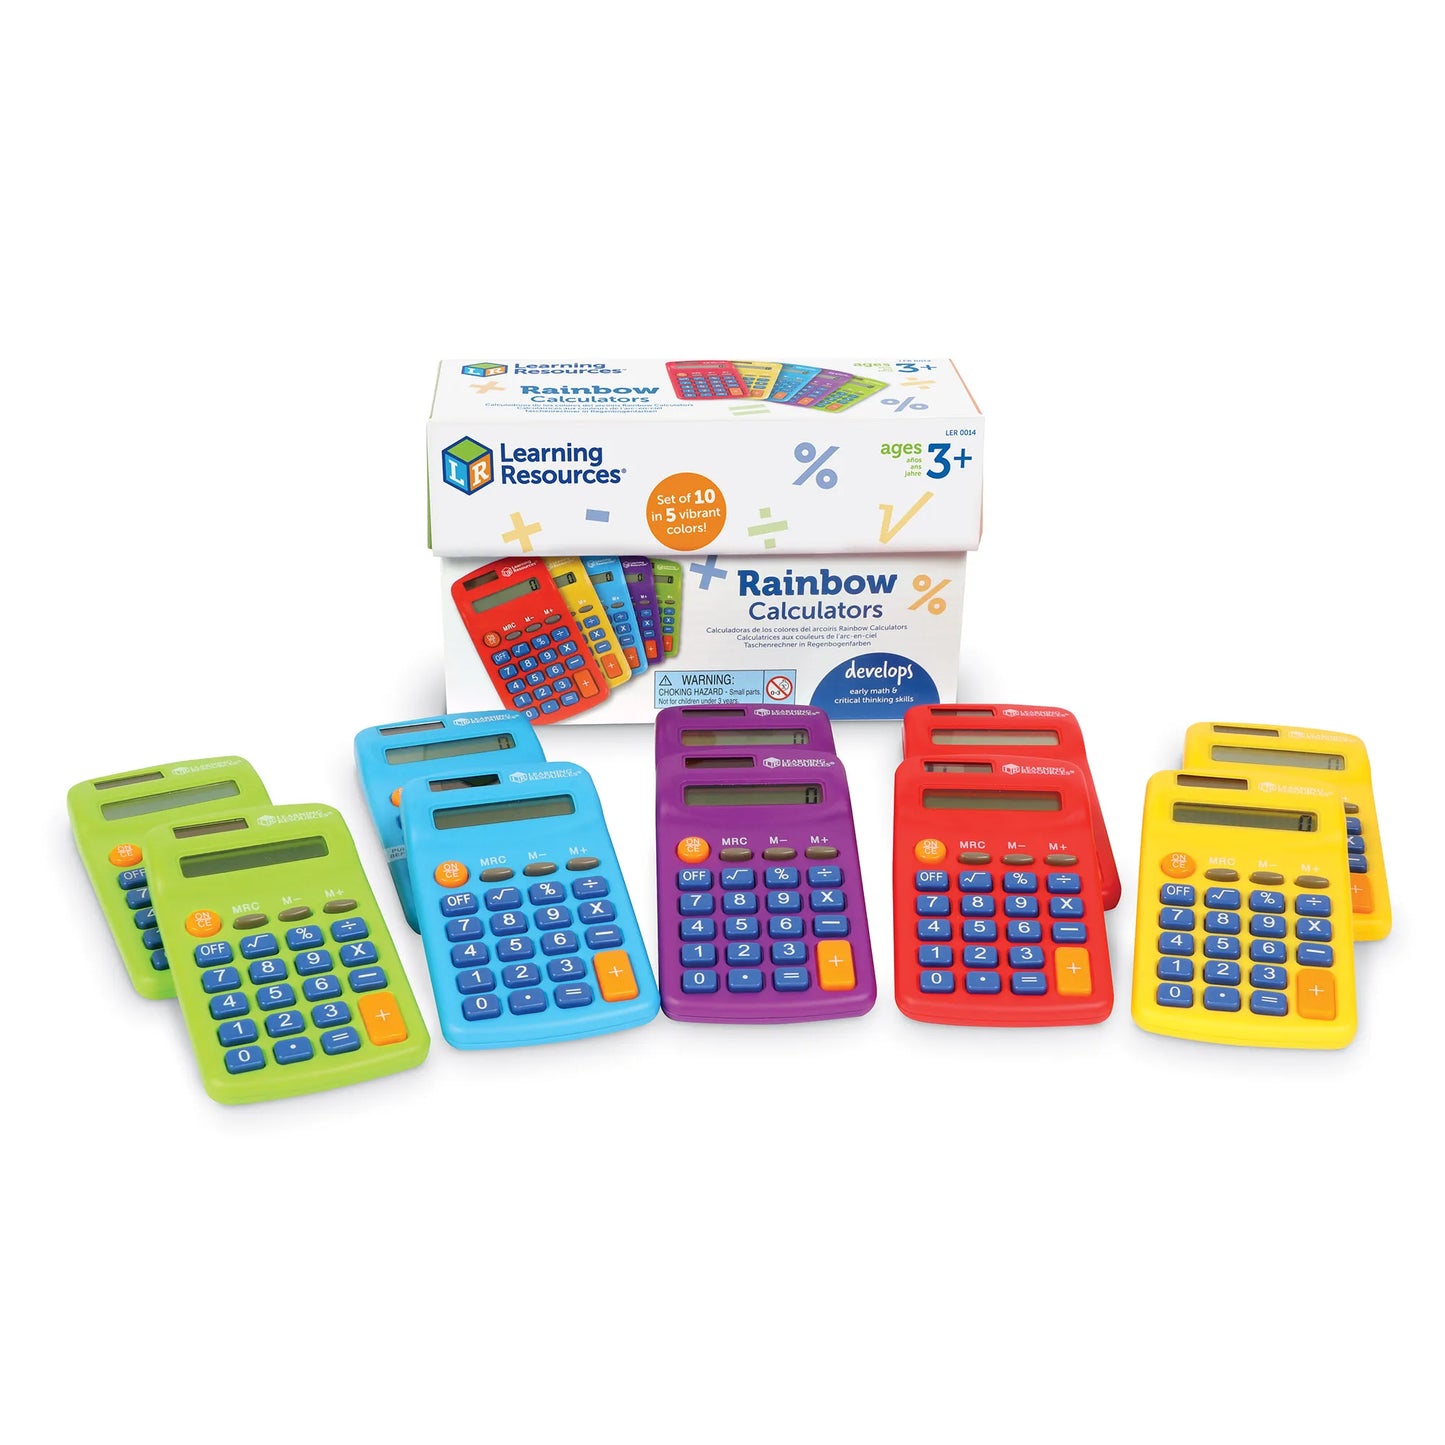 Learning Resources Rainbow Calculators Set of 10